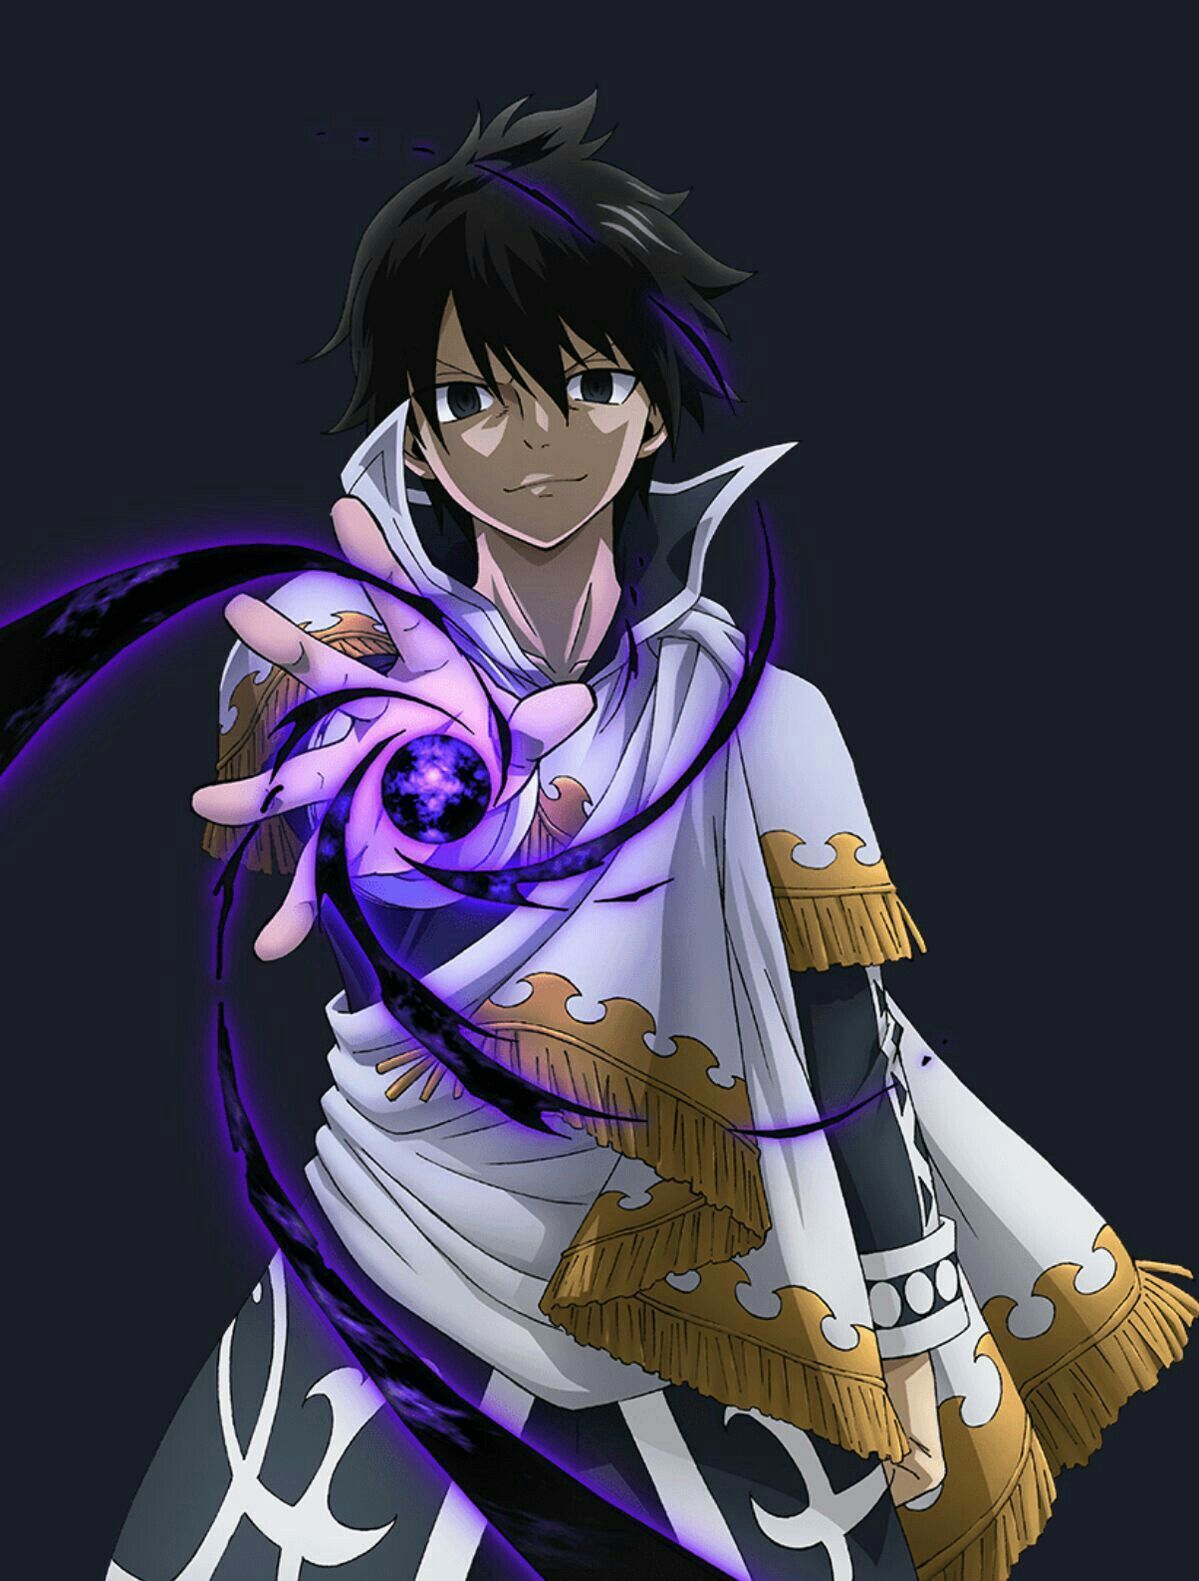 Who is Zeref in Fairy Tail